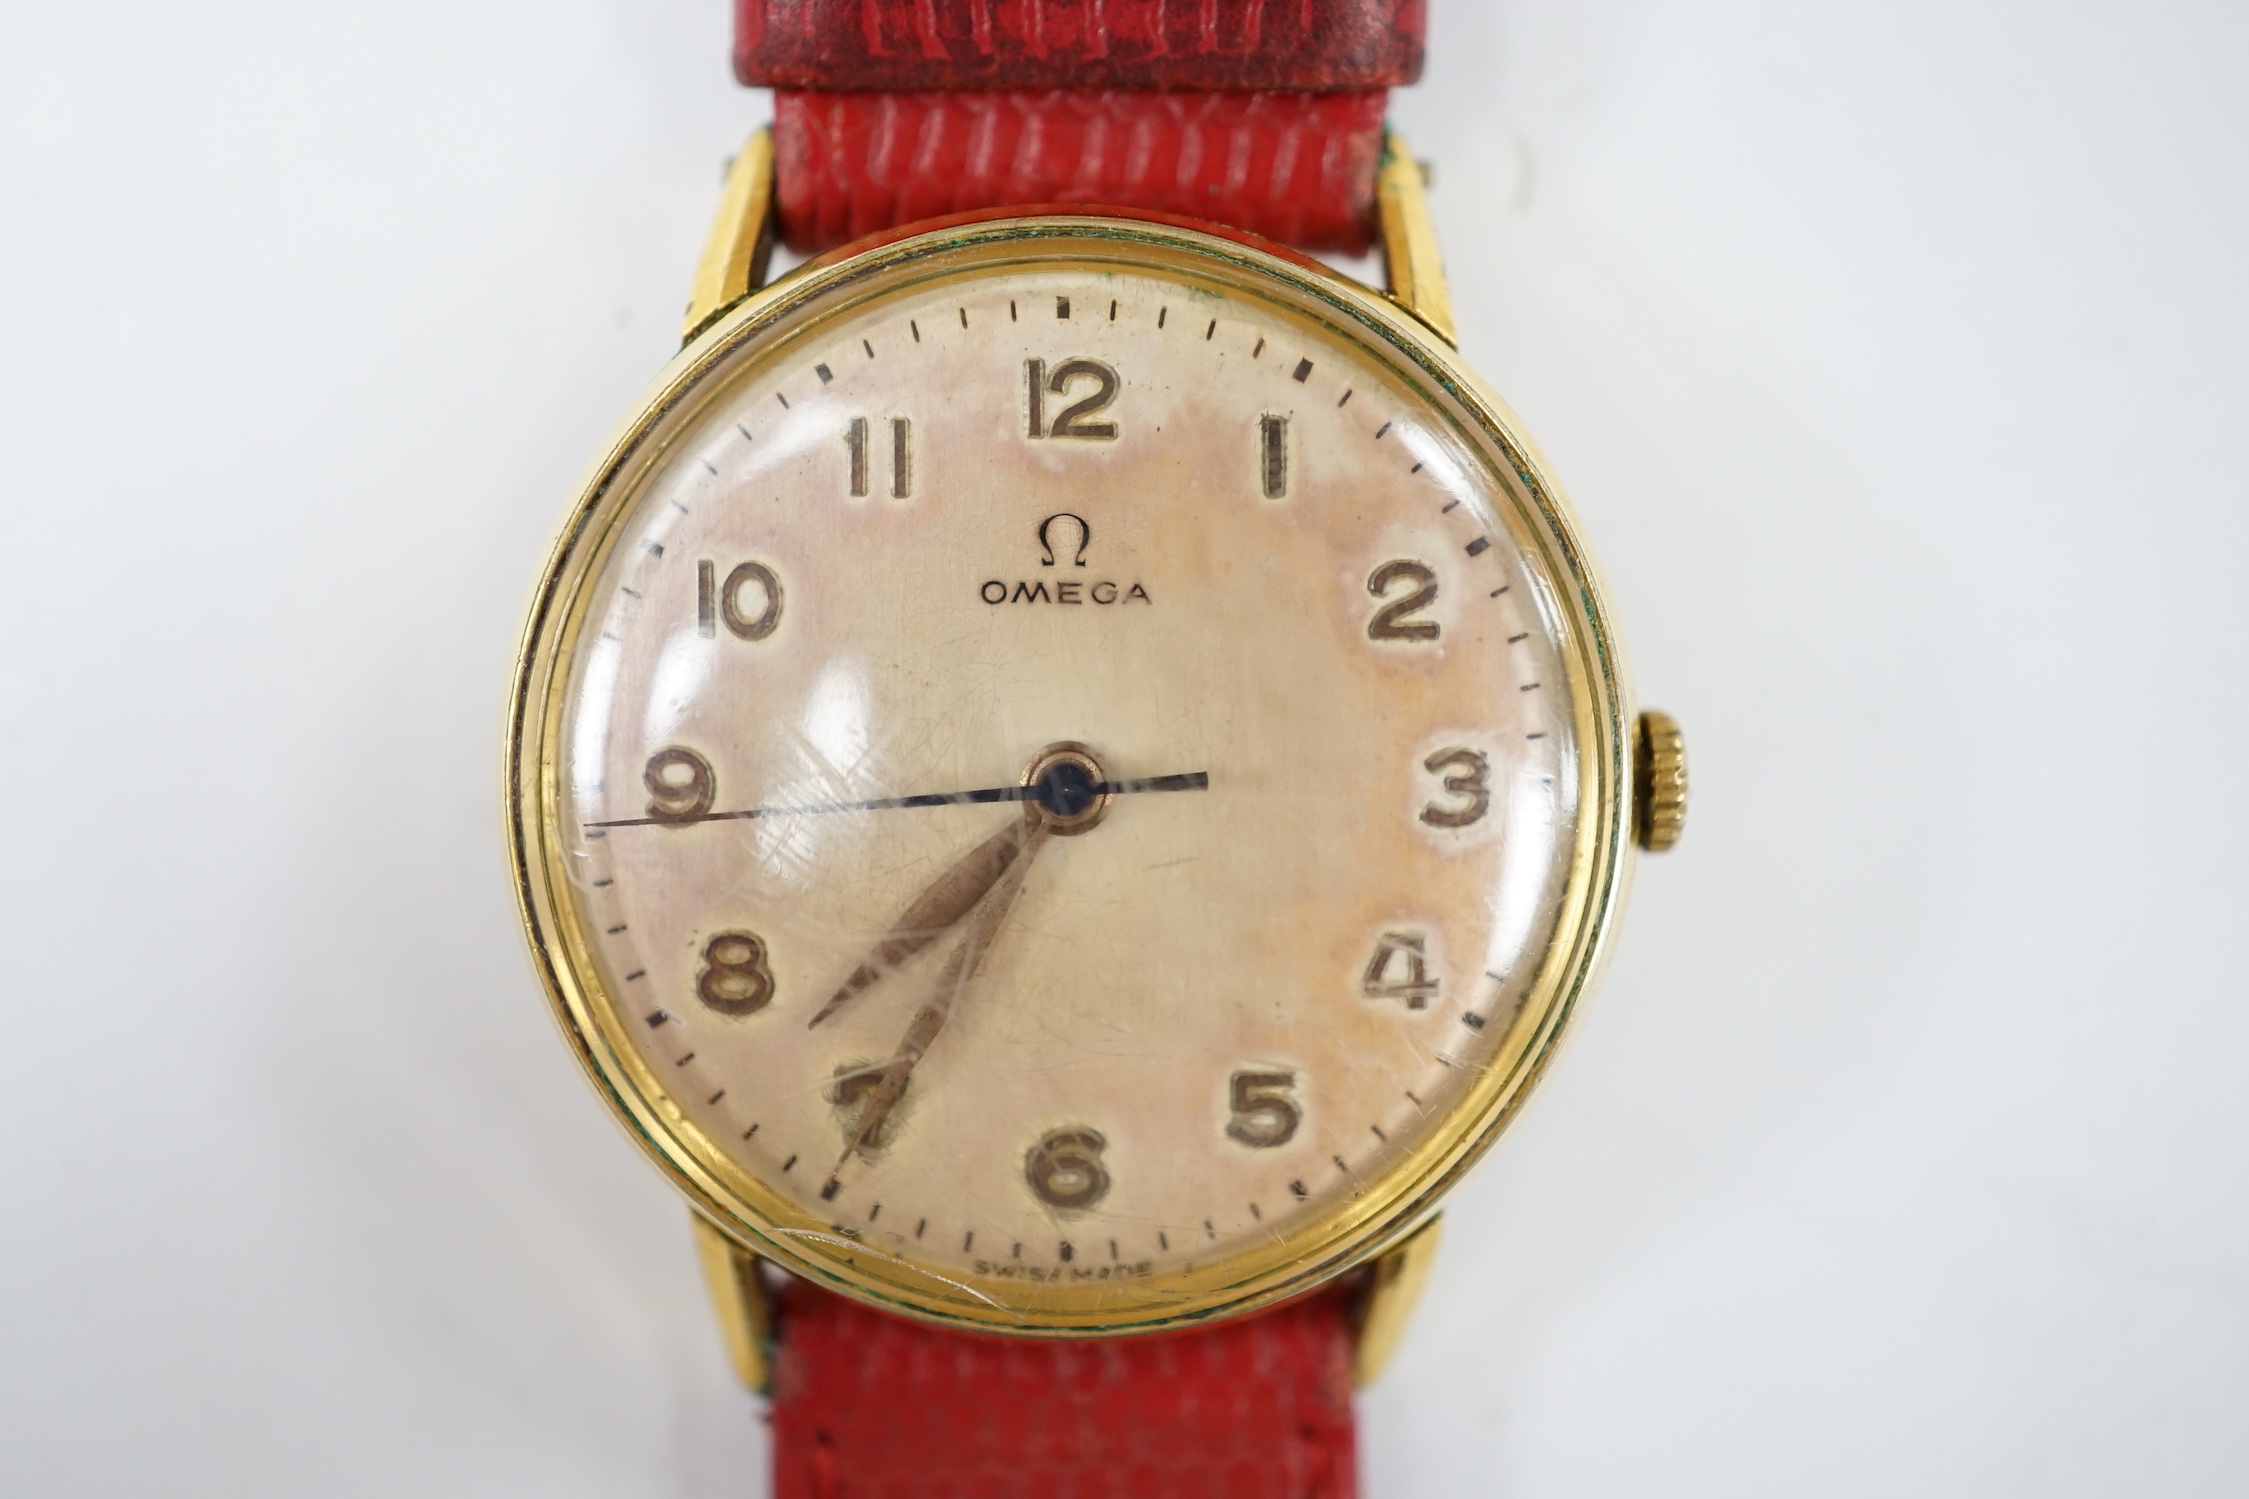 A gentleman's late 1940's gold plated Omega manual wind wrist watch, on associated leather strap, case diameter 32mm, no box or papers.